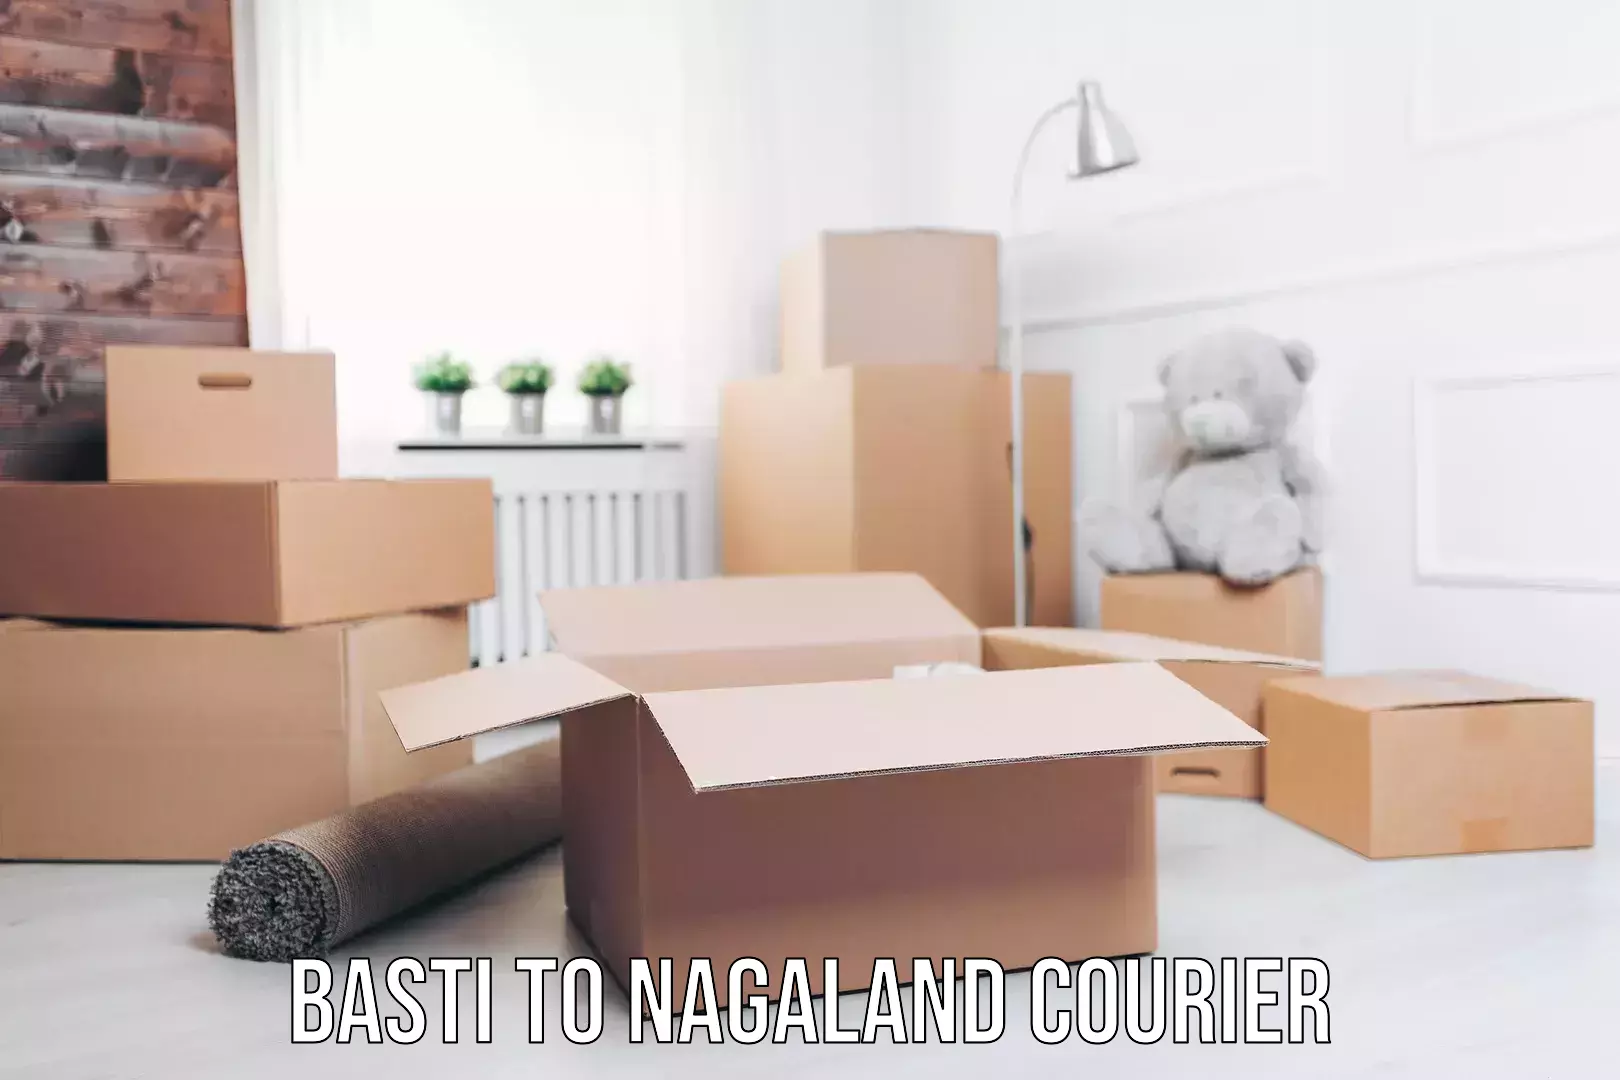 Ocean freight courier in Basti to Nagaland